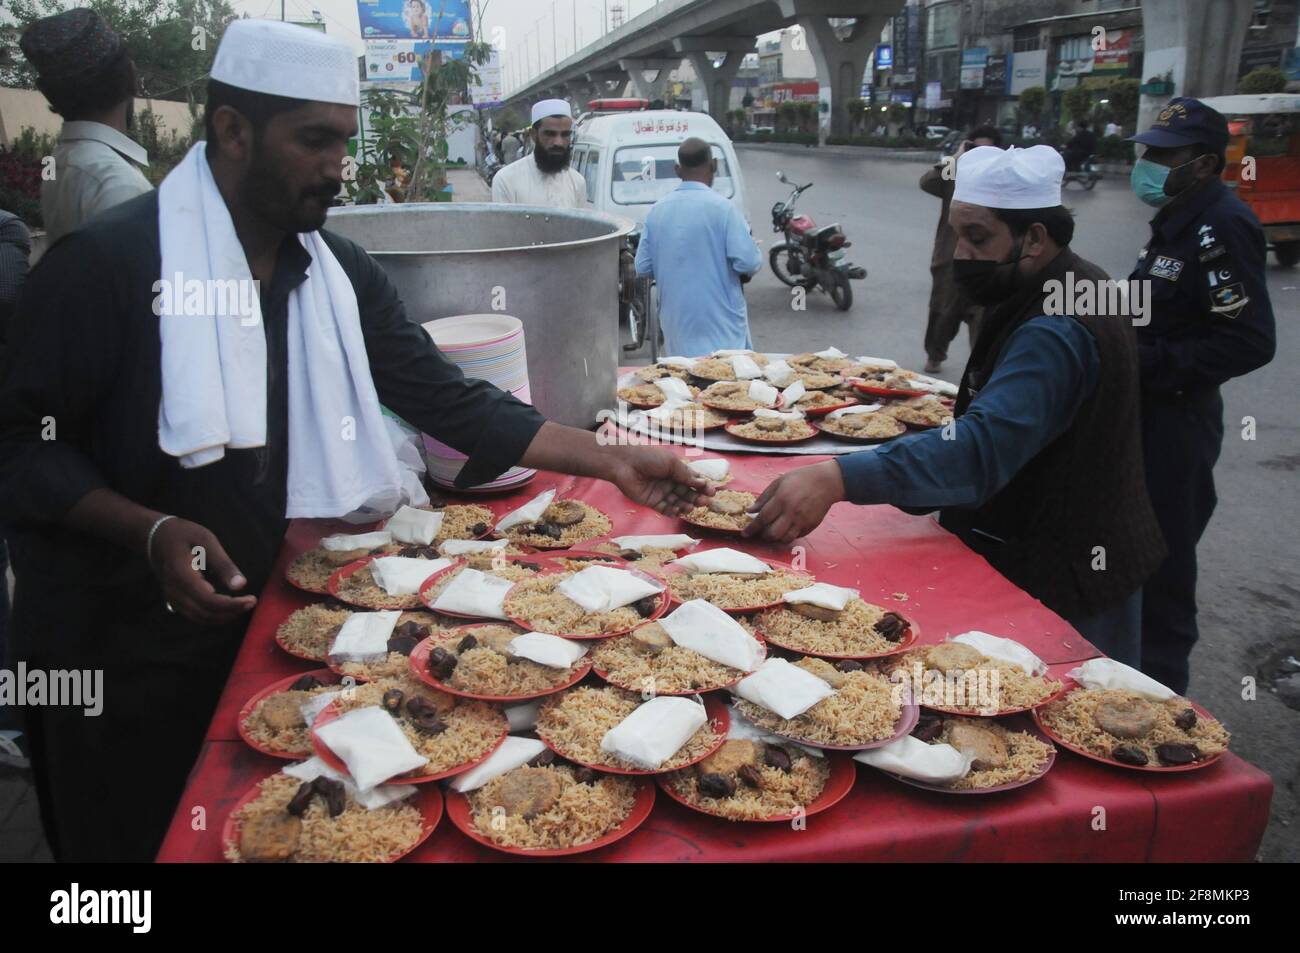 Rawalpindi, India. 14th Apr, 2021. Faithful Muslims prepare Iftari (breaking fast meal) for worshippers on the first day of the Holy month of Ramadan-ul-Mubarak at Muree road in Rawalpindi. (Photo by Zubair Abbasi/Pacific Press) Credit: Pacific Press Media Production Corp./Alamy Live News Stock Photo